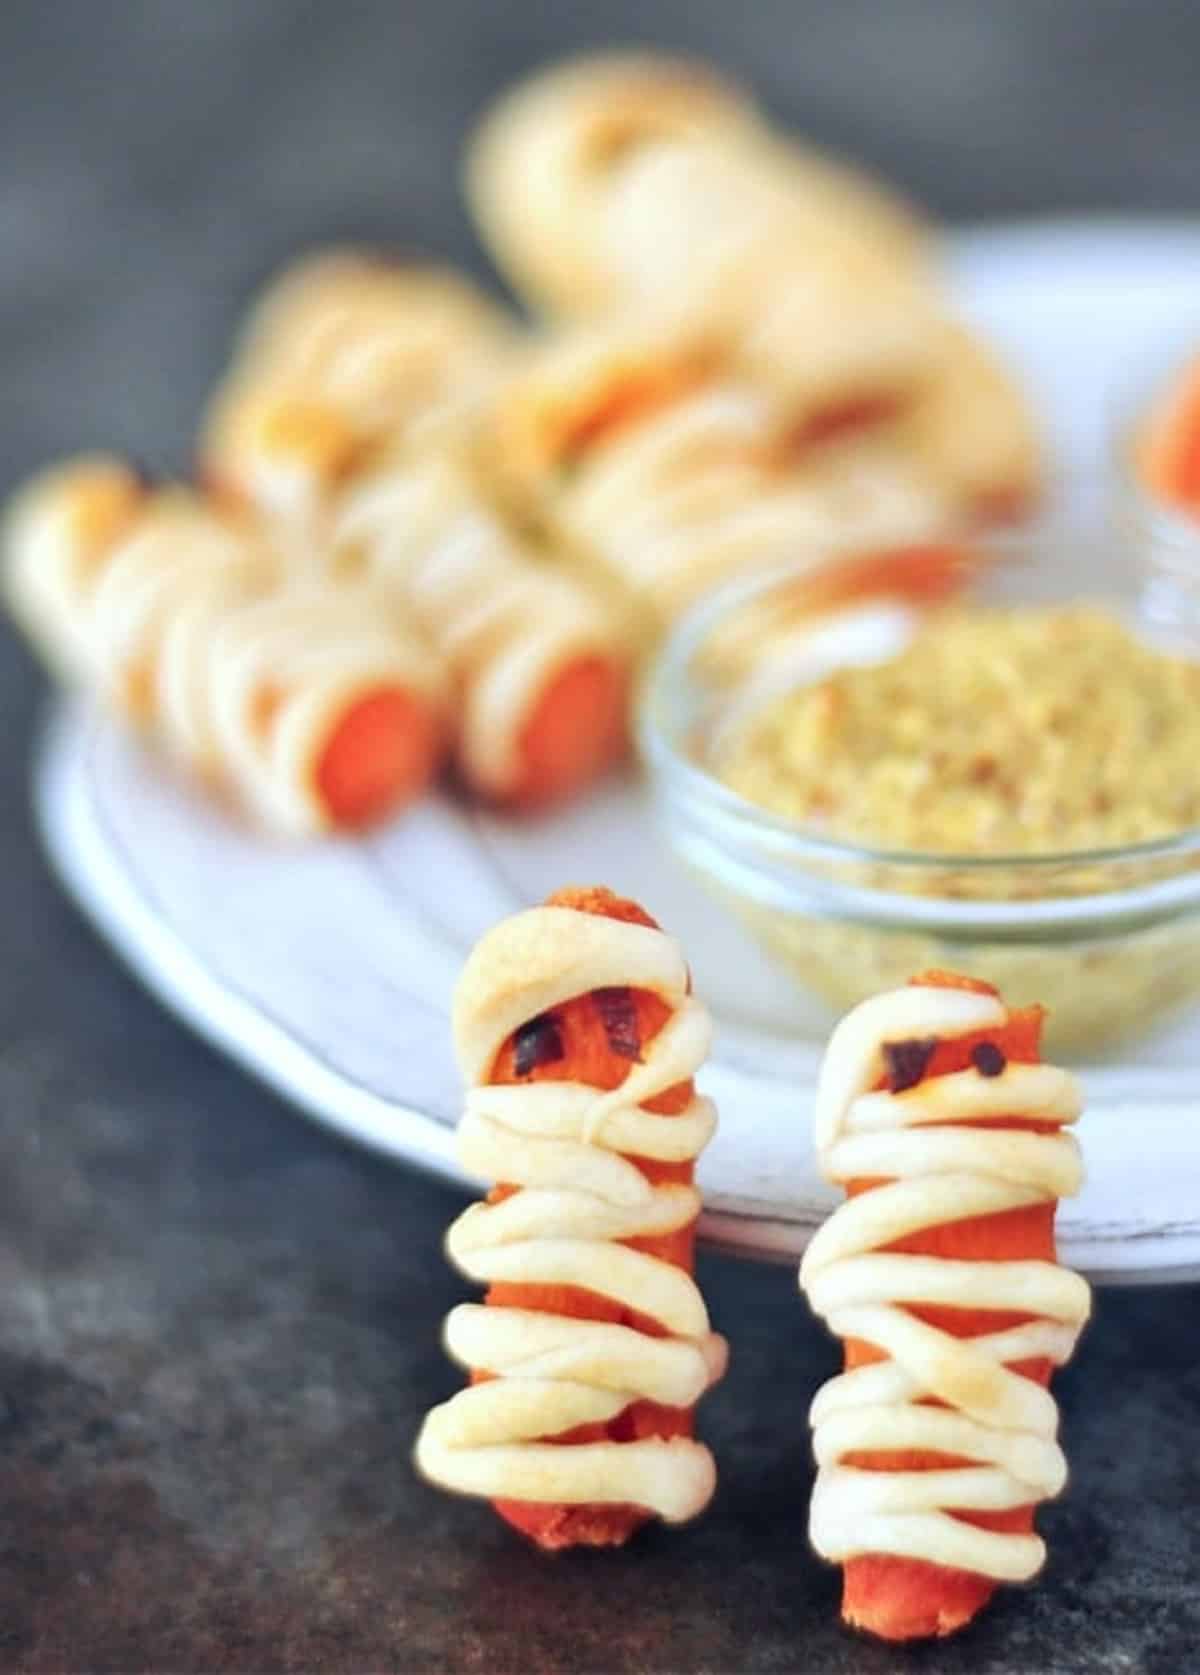 Mini carrots wrapped in pastry to look like mummies for Halloween sit on a serving plate with small glass bowls of hot sauce and mustard. Two "mummies" stand at the edge of the plate.